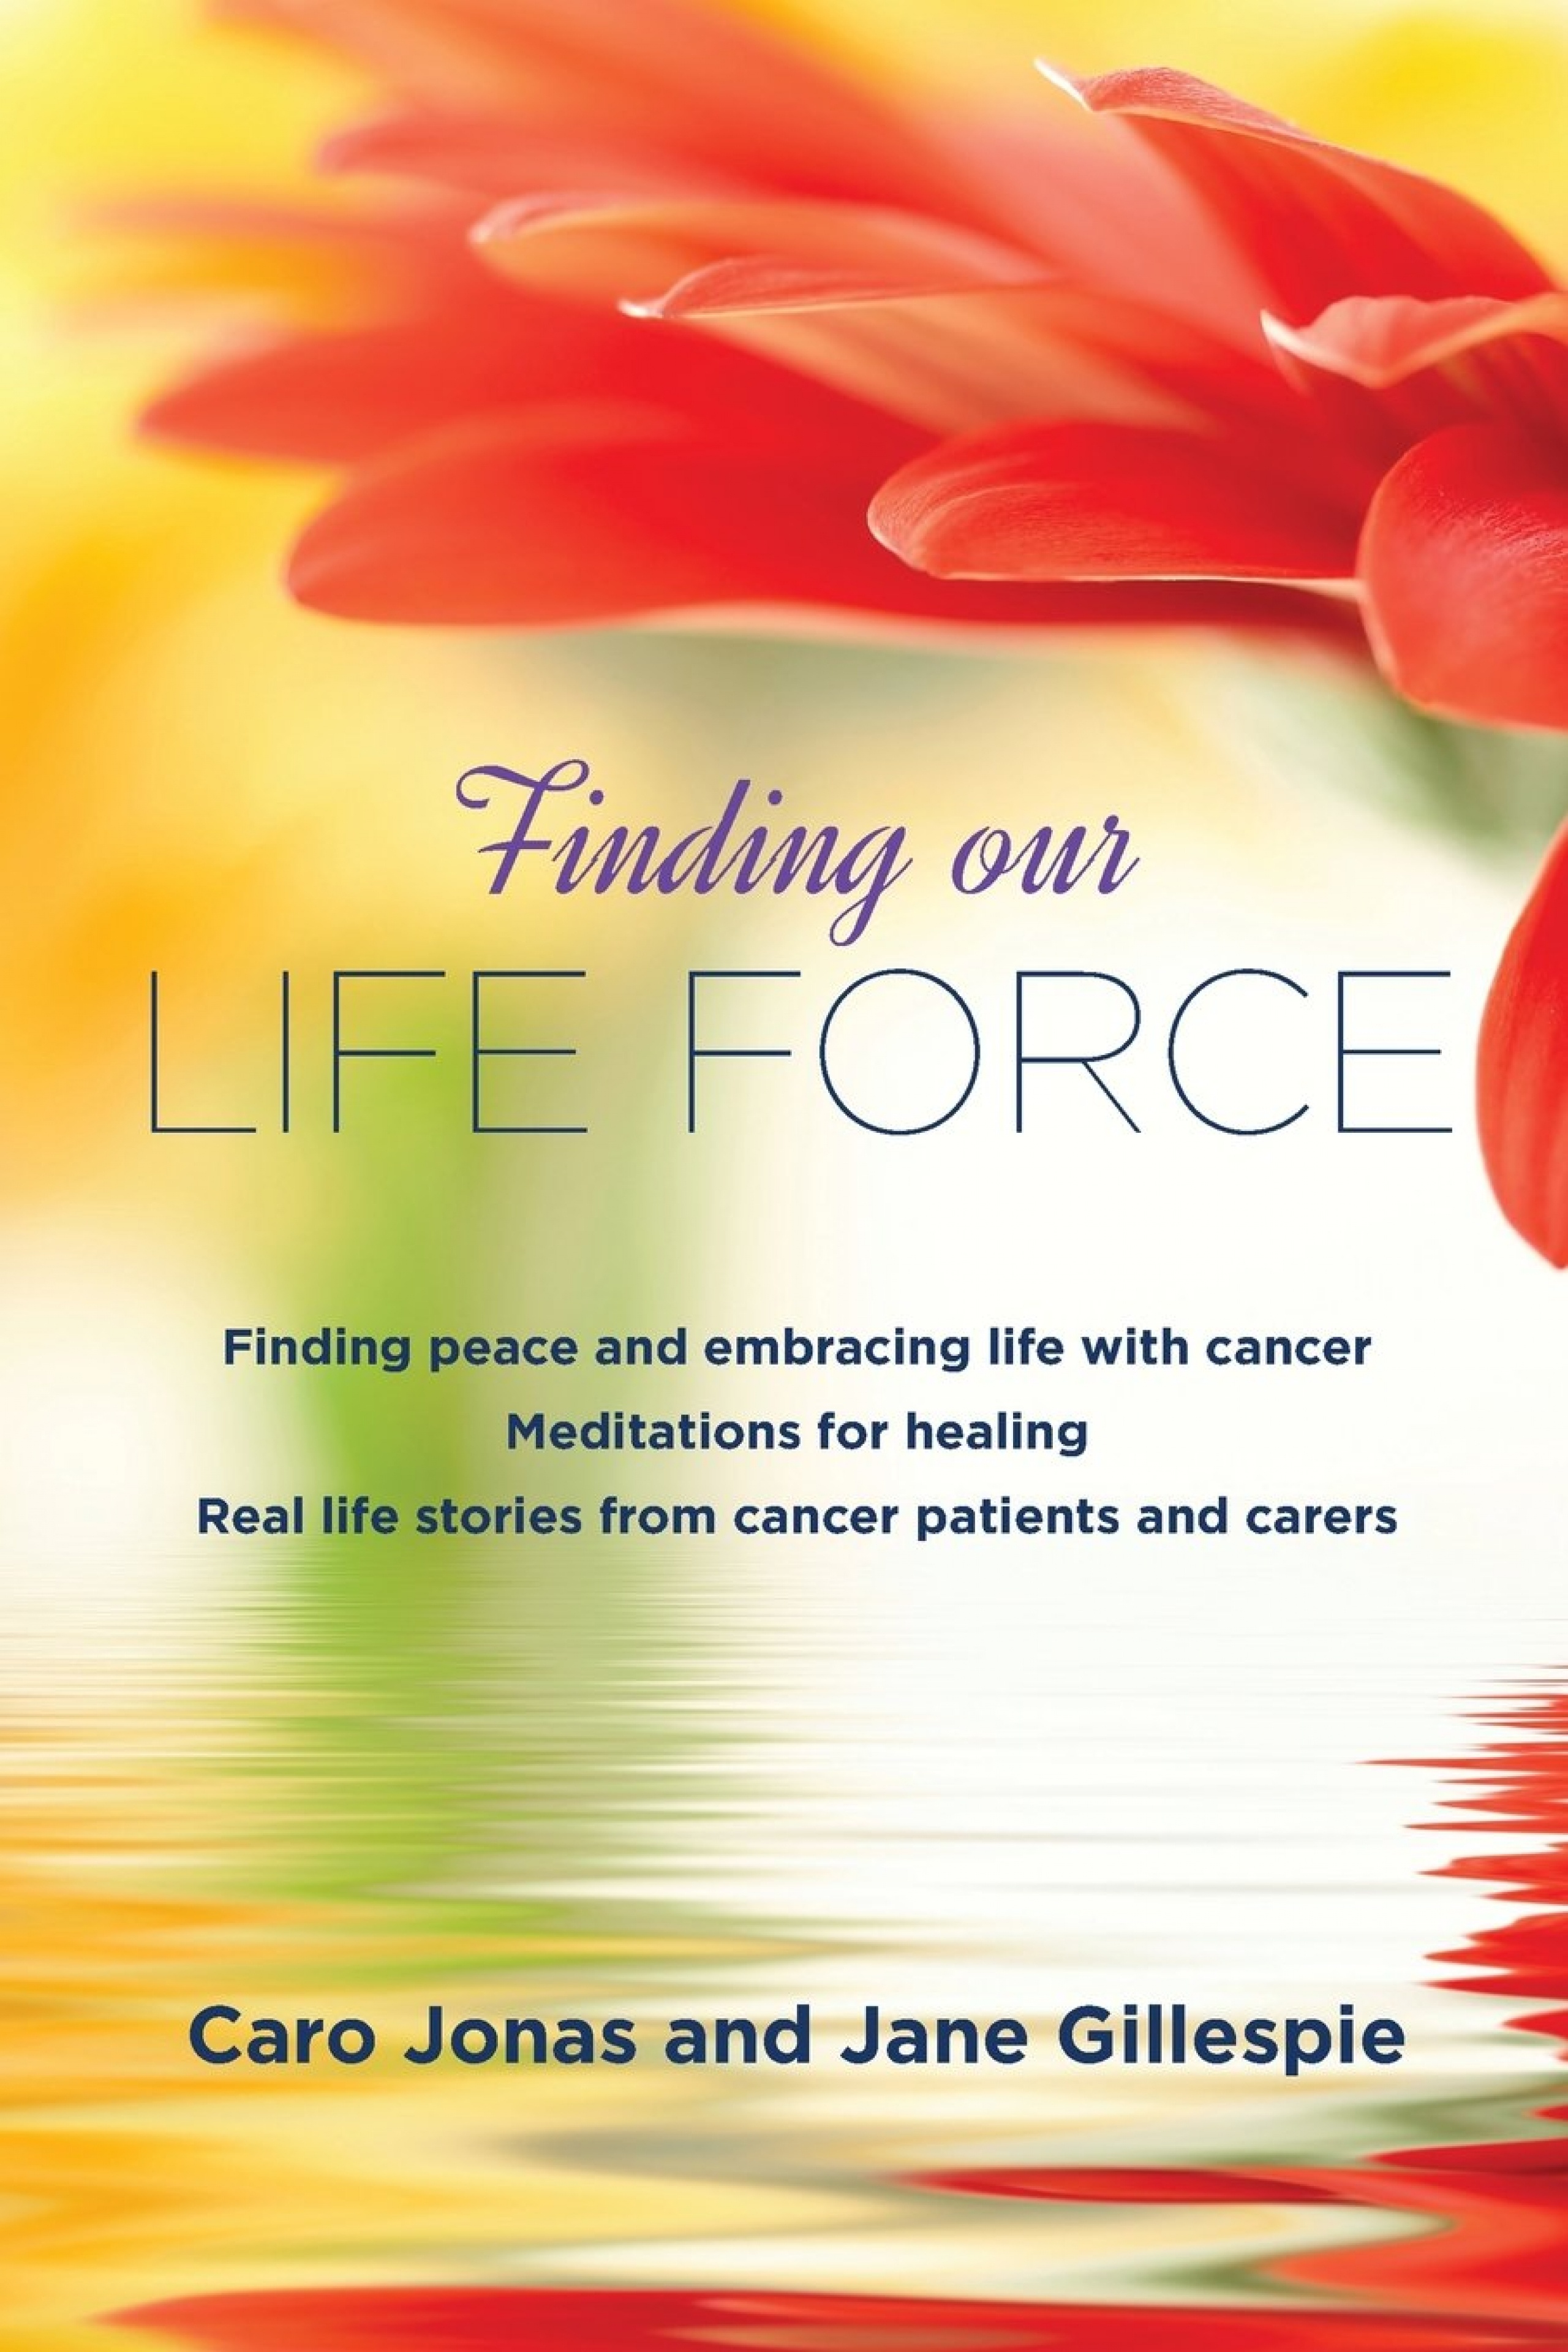 Life Force Cancer Foundation Supporting people dealing with cancer since 1993--